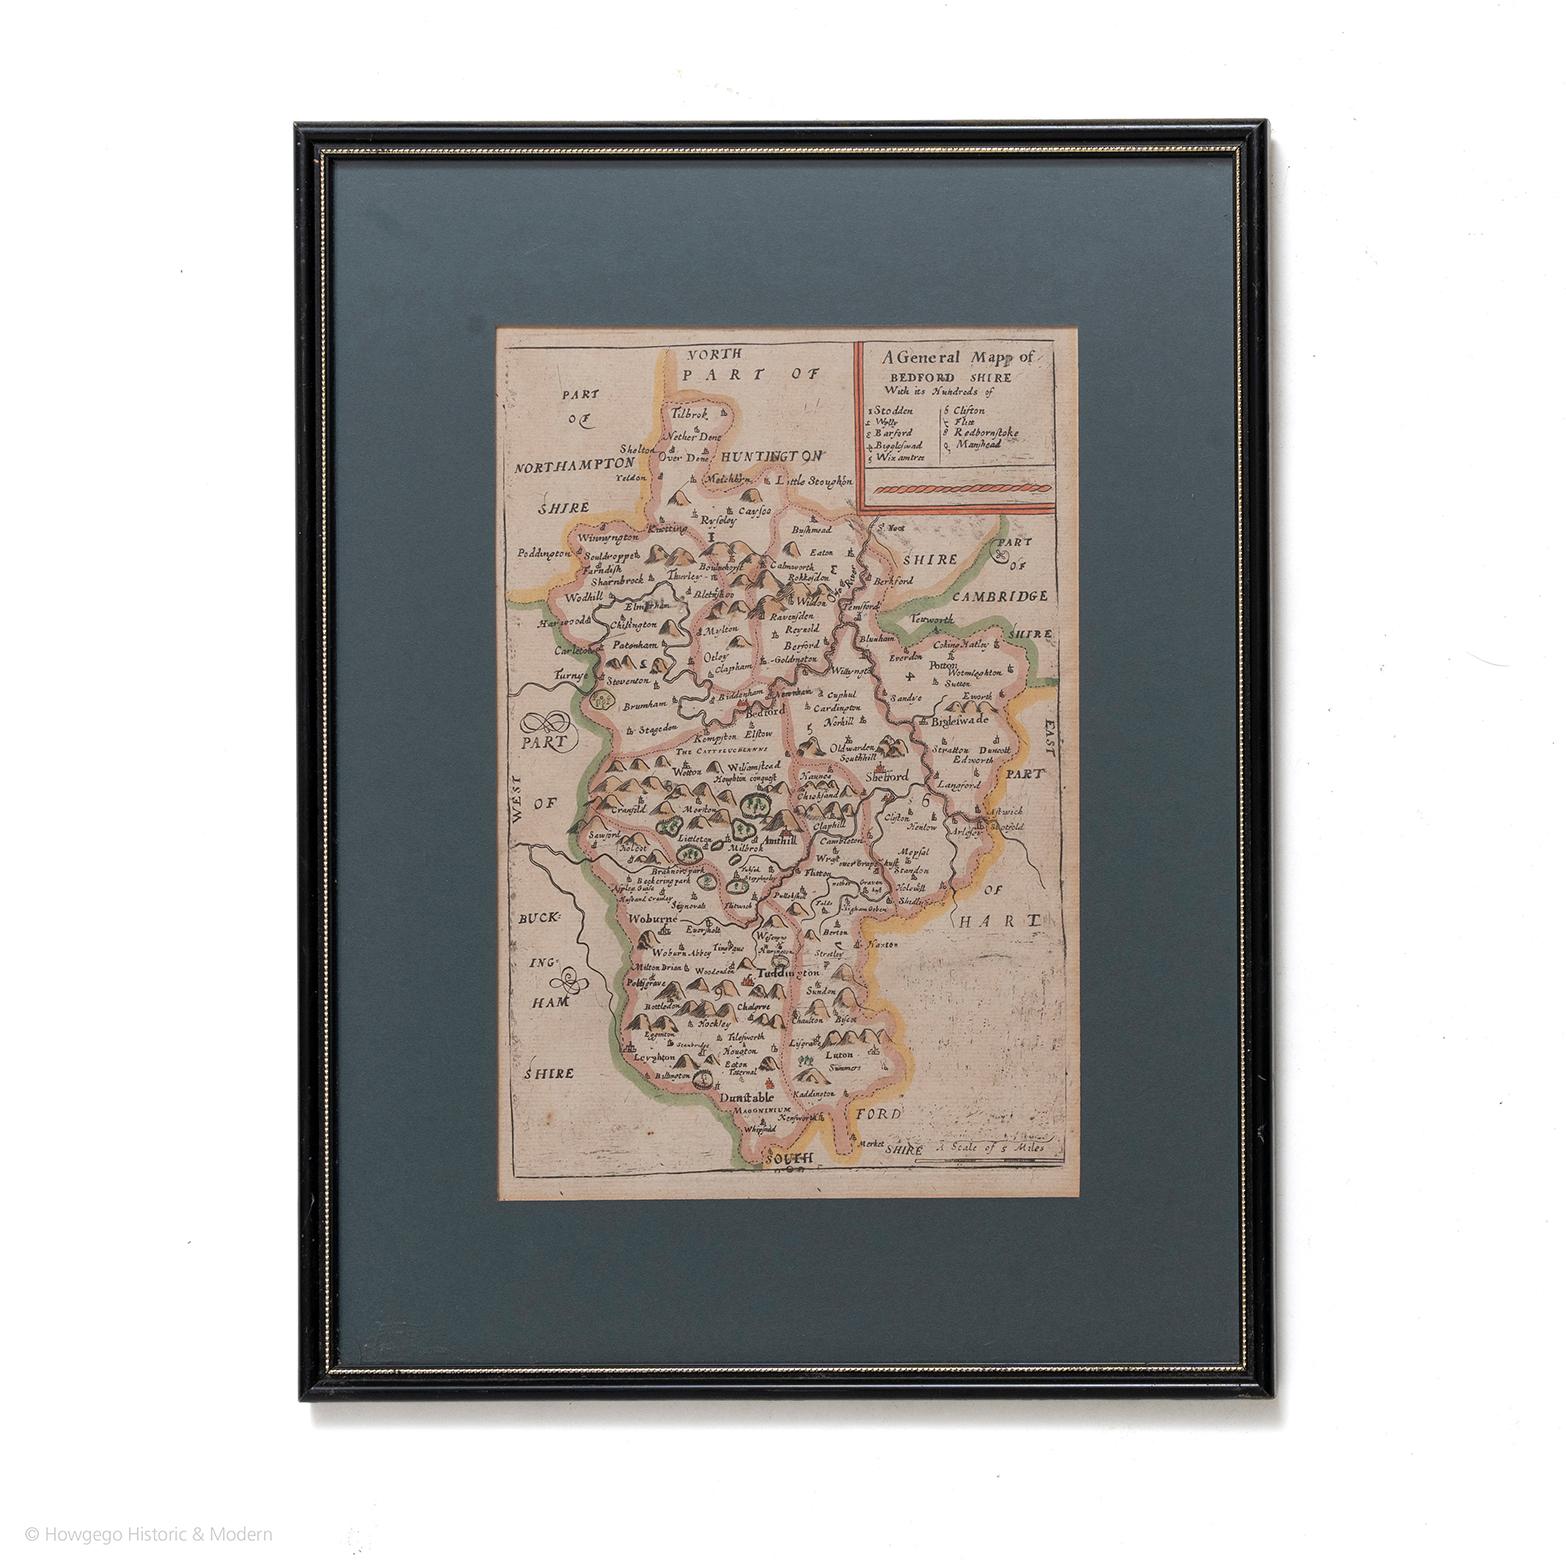 A general map of Bedfordshire with its hundreds
A scale of 5 miles
in the original green mount and traditional black and gold frame. Measures: 36cm 14